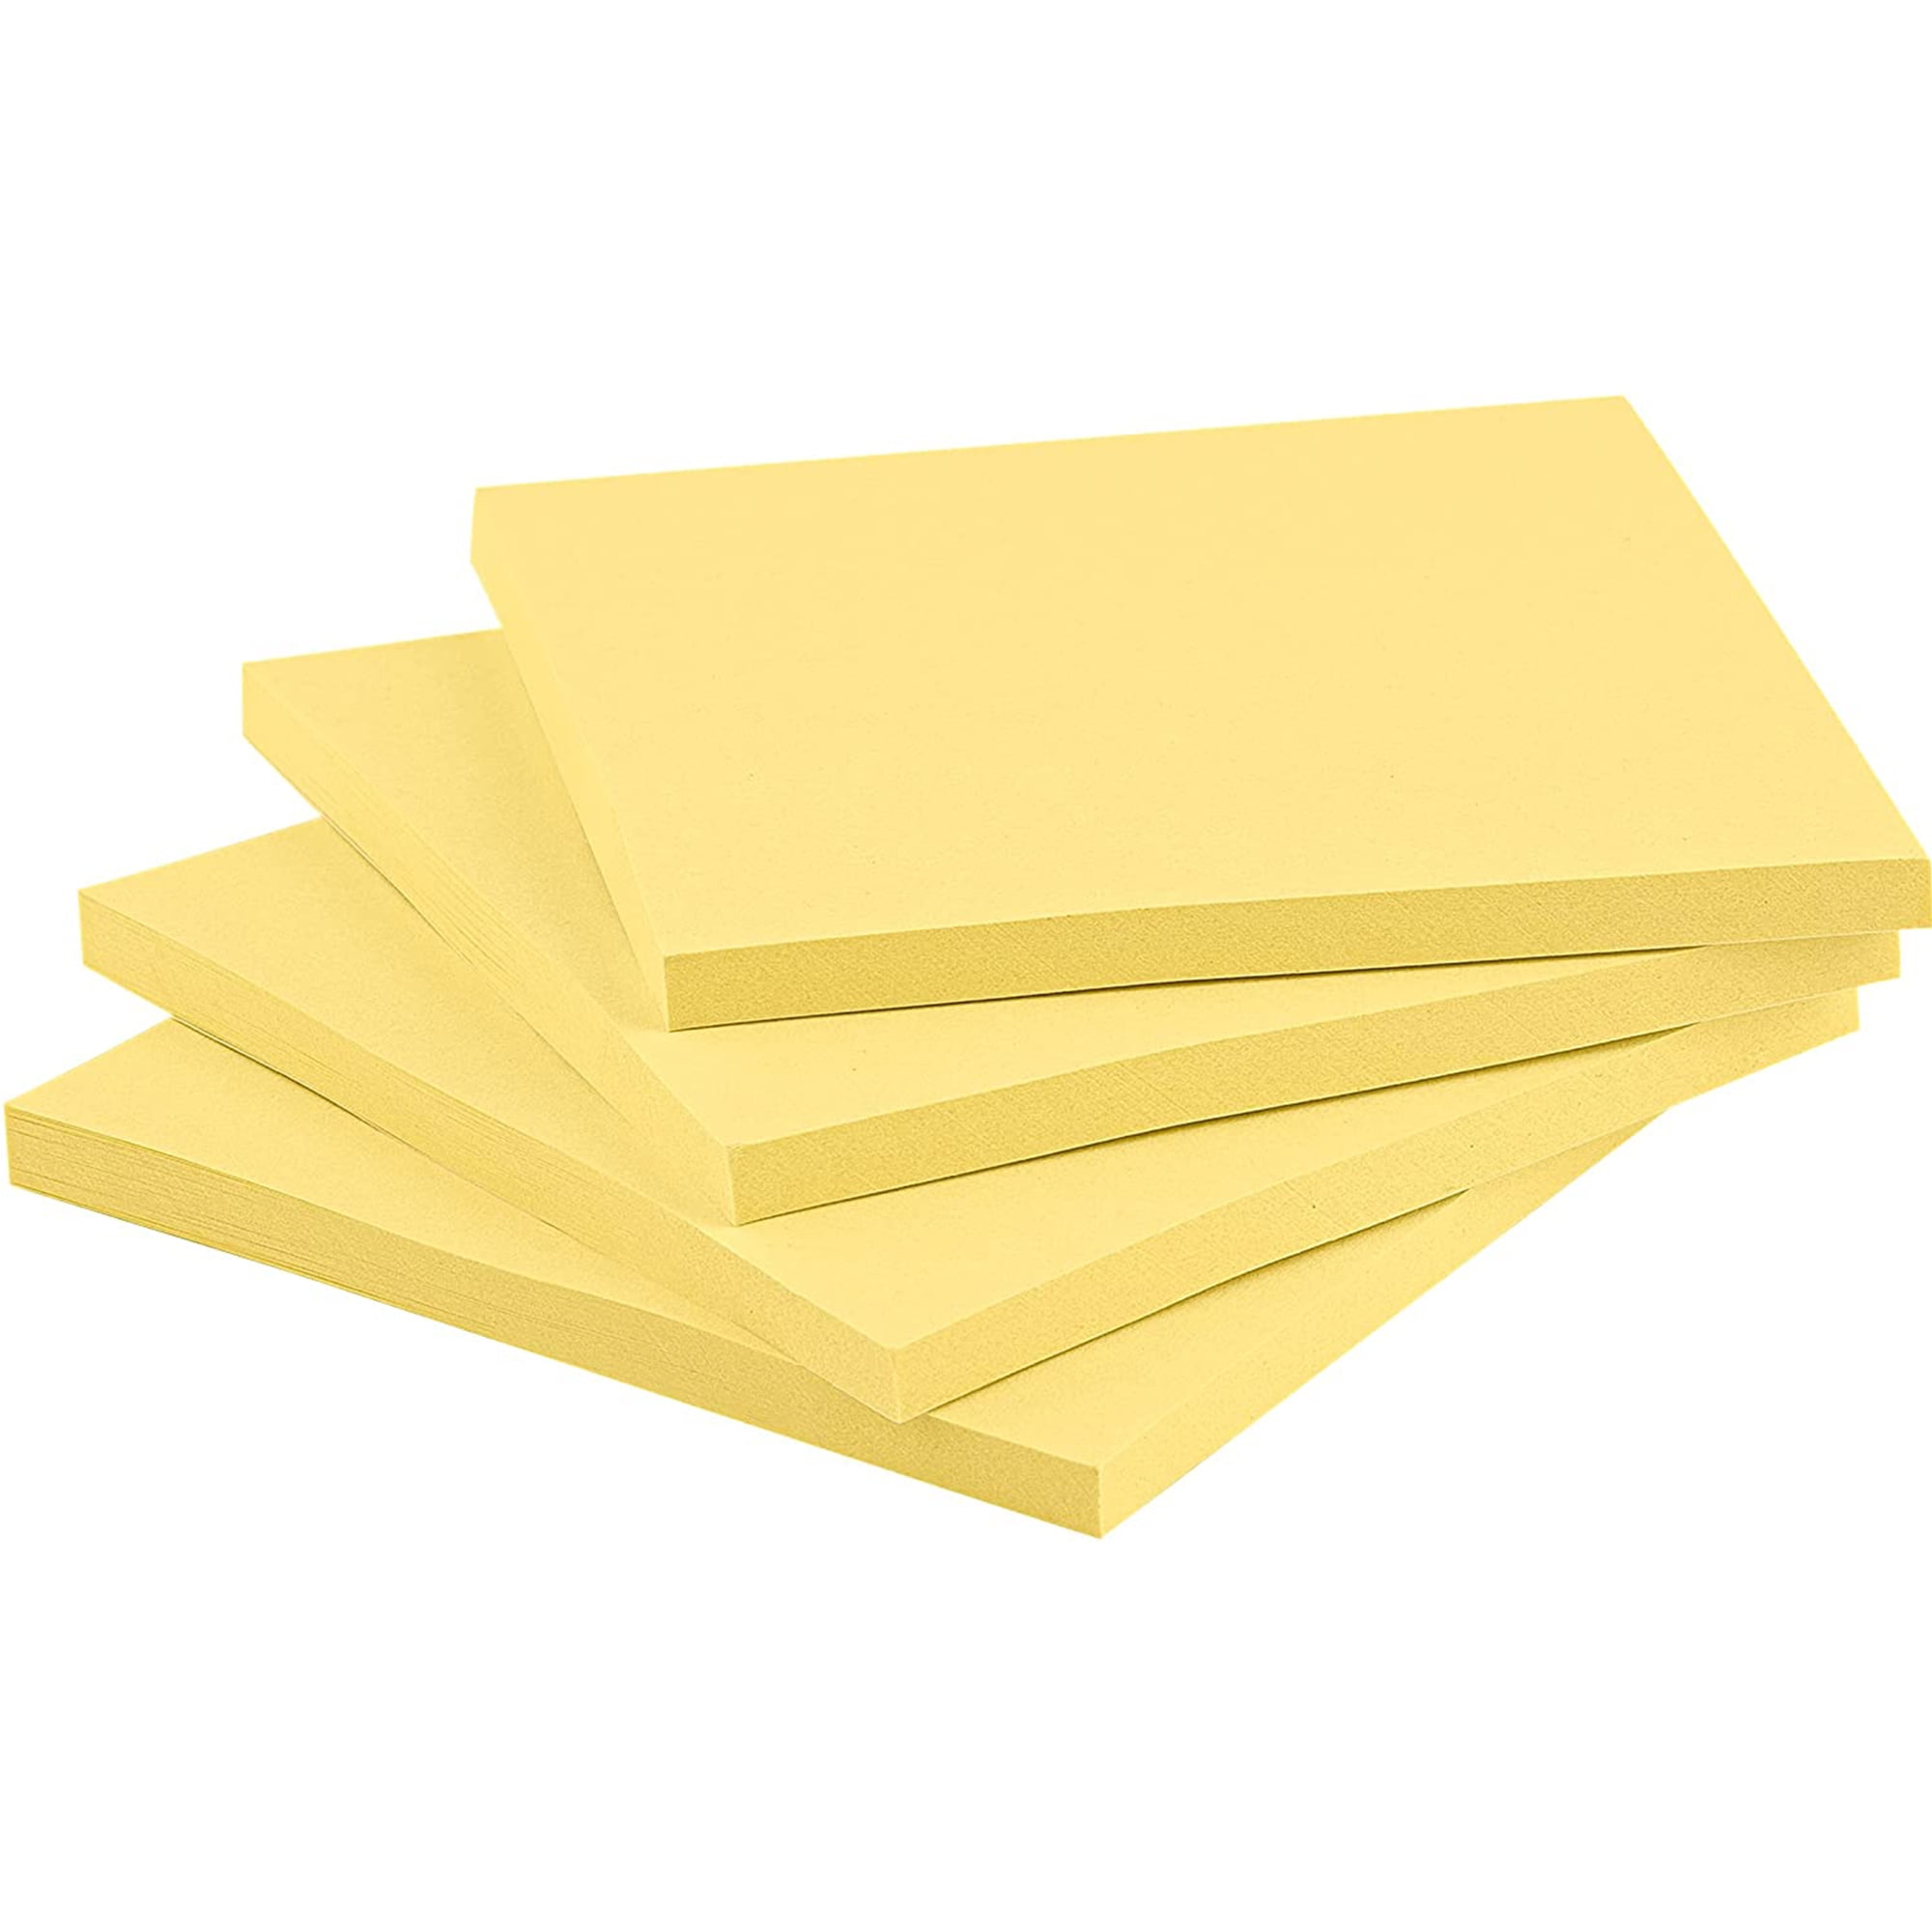 HappyHapi Sticky Notes 3x3 Inches, 28 Pack Colored Self-Sticky Notes Pad, 100 Sheets/Pad, 4 Colors, Yellow